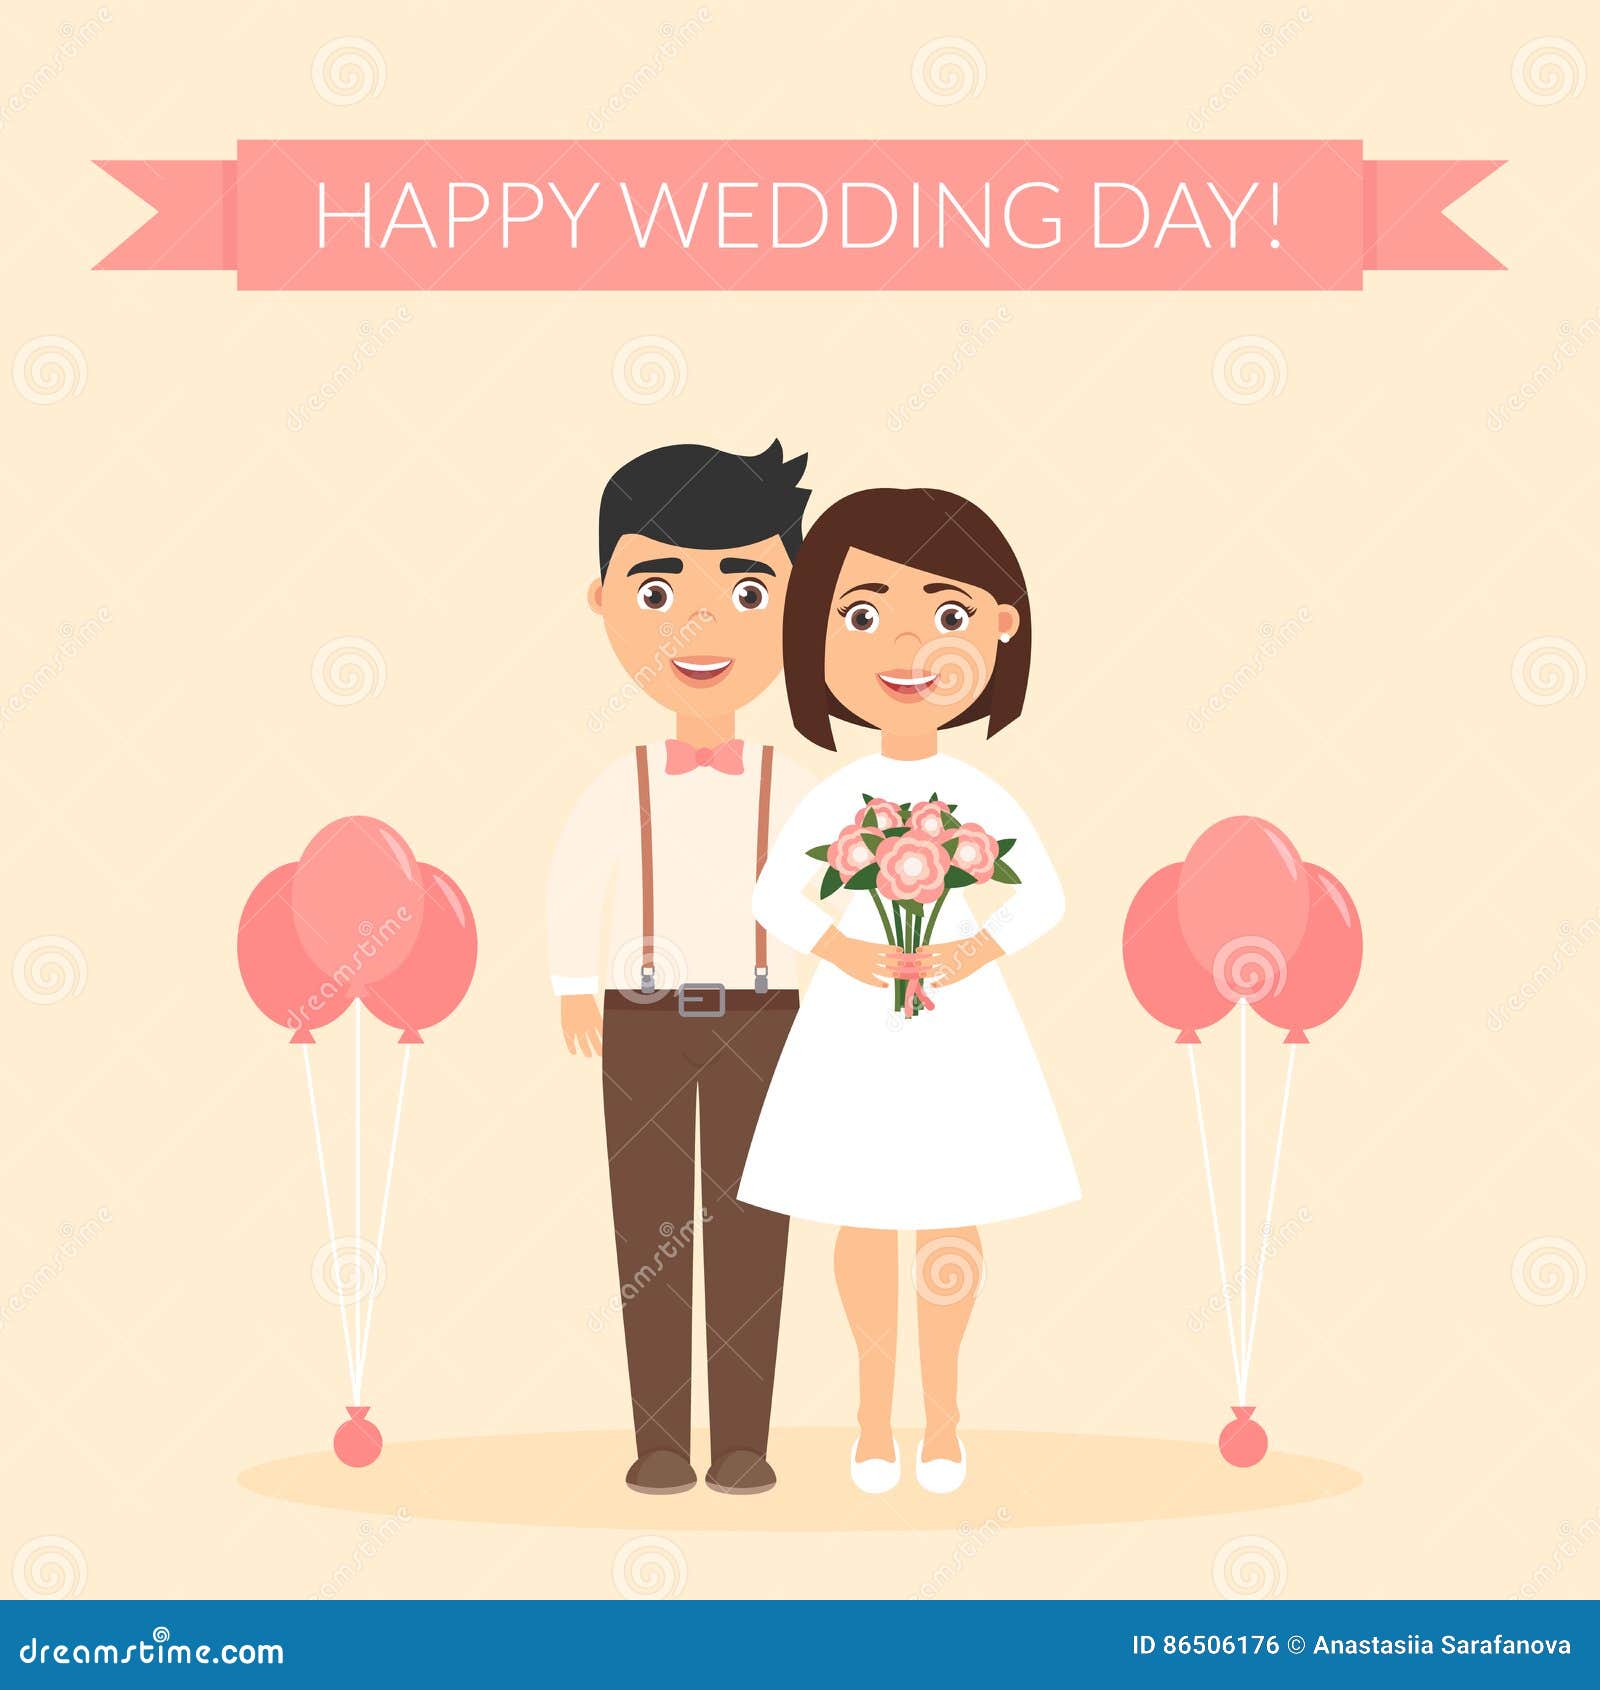 Happy Wedding Day Greeting Card For Newlyweds Festive Vector